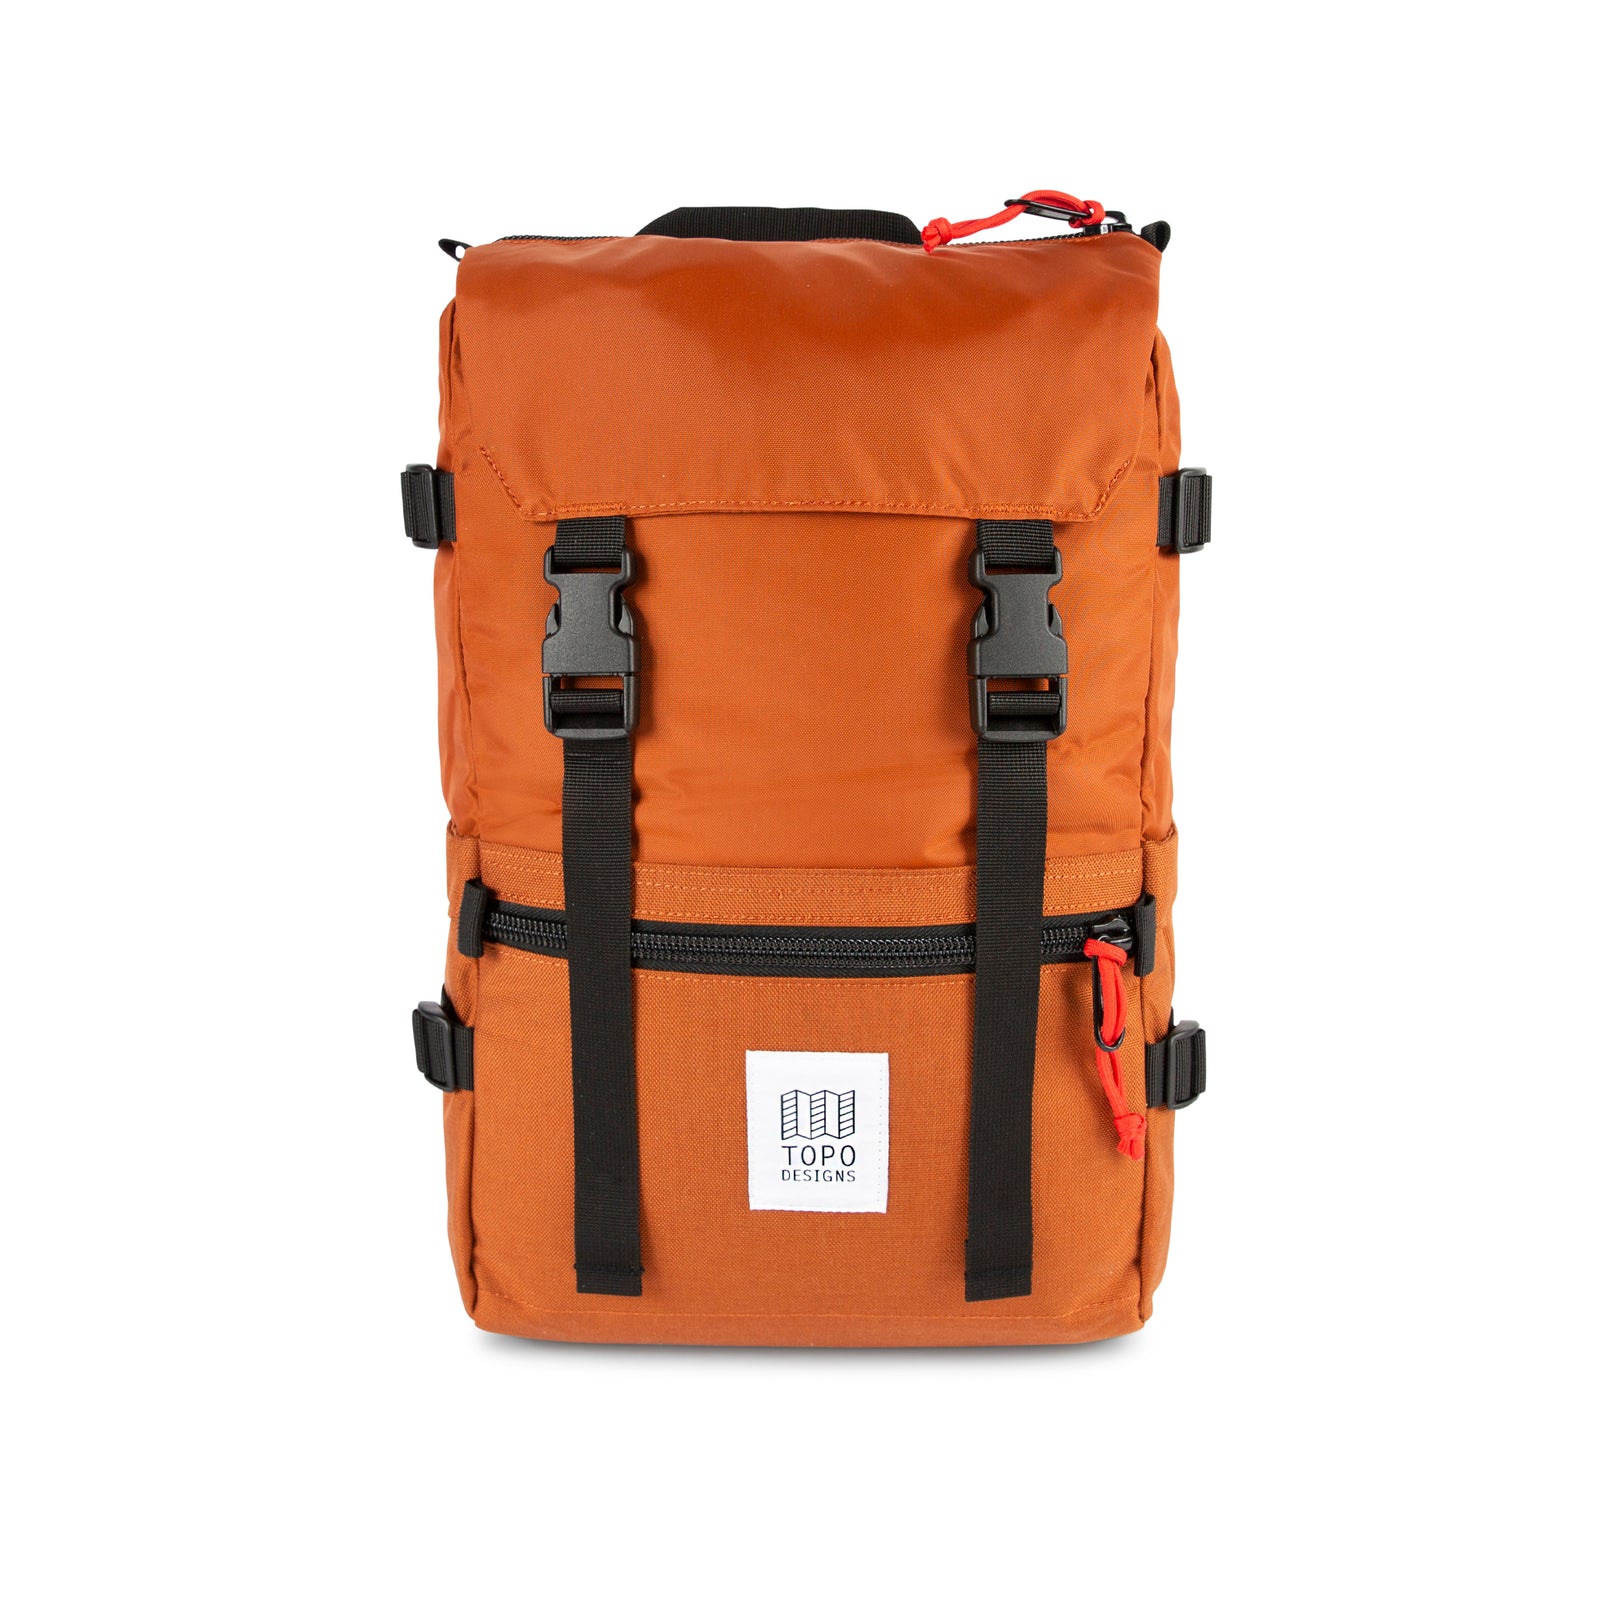 Topo Designs Rover Pack Classic laptop backpack in "Clay".